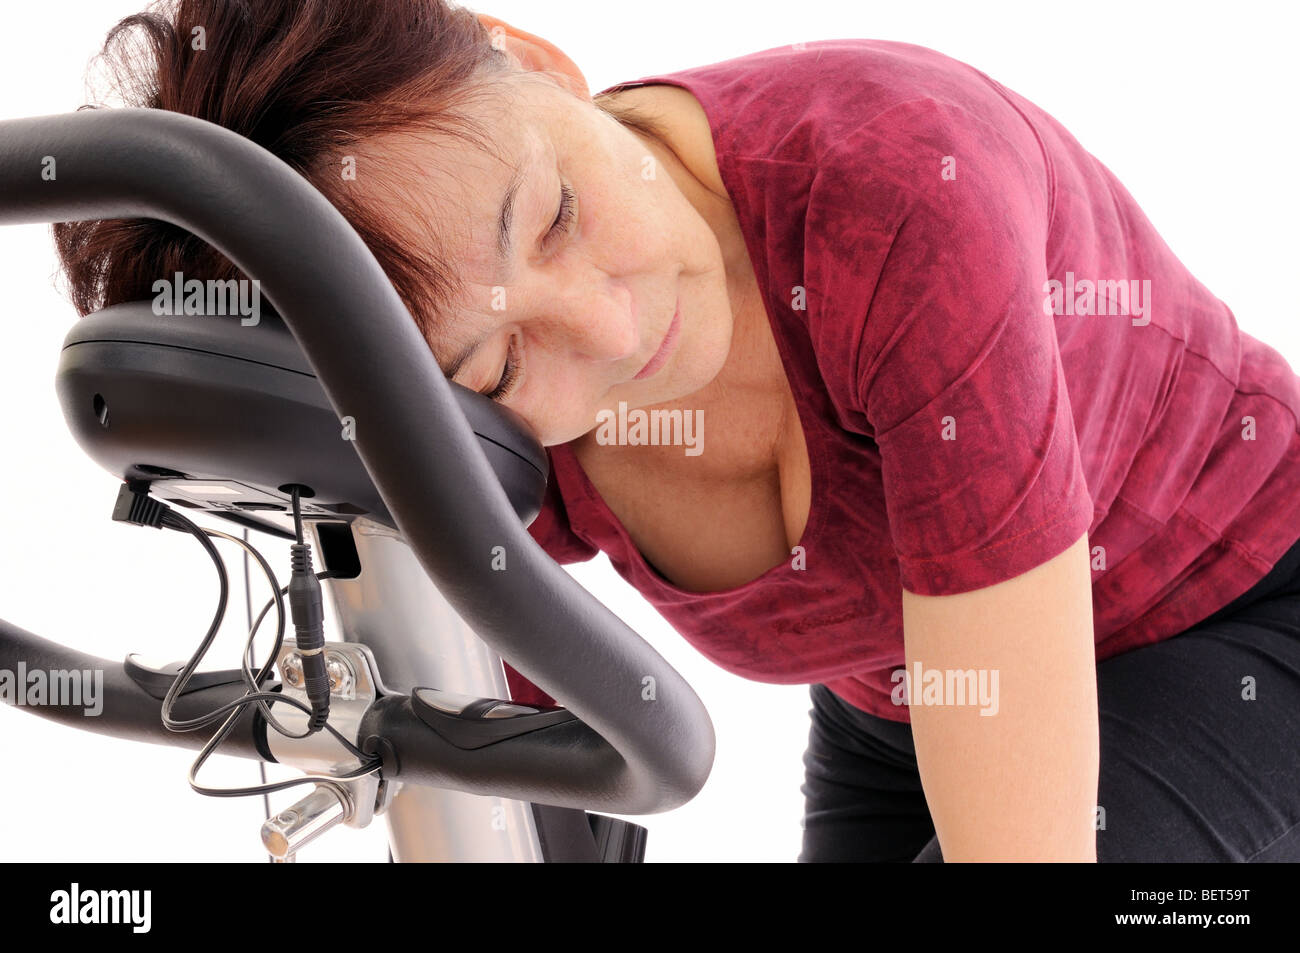 Tired senior woman on spinning bicycle - isolated Stock Photo